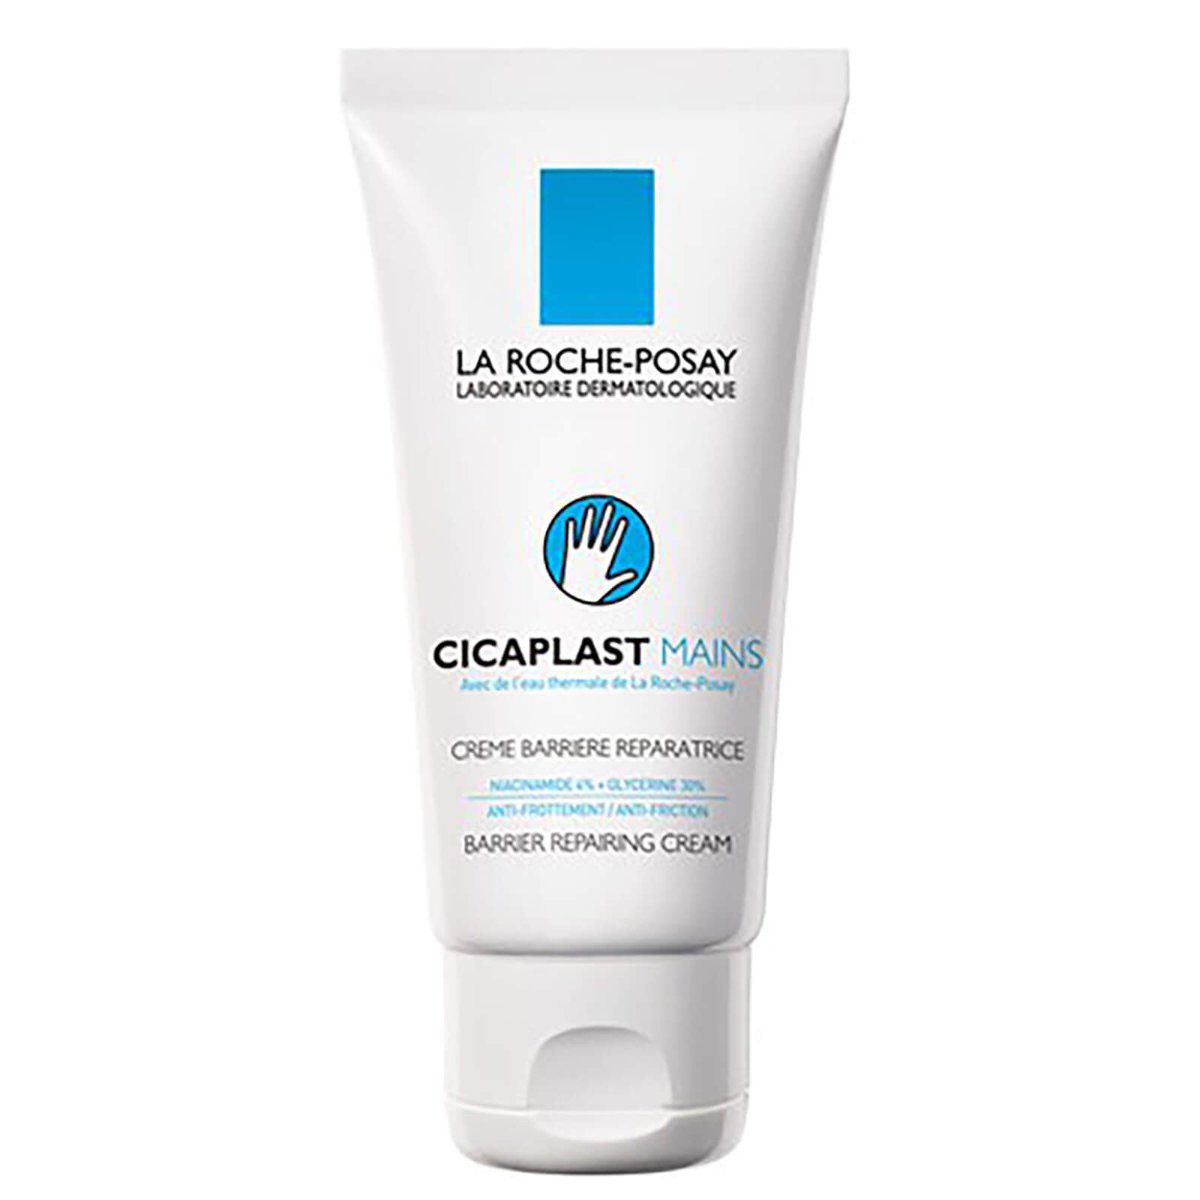 This Cicaplast cream from  @LaRochePosayUKI is phenomenal for hands in dire straits. I’ve finished a whole tube. As a range in general, I use a lot of their products. But this one is unique for repairing hands that are wrecked.  #cleansafe